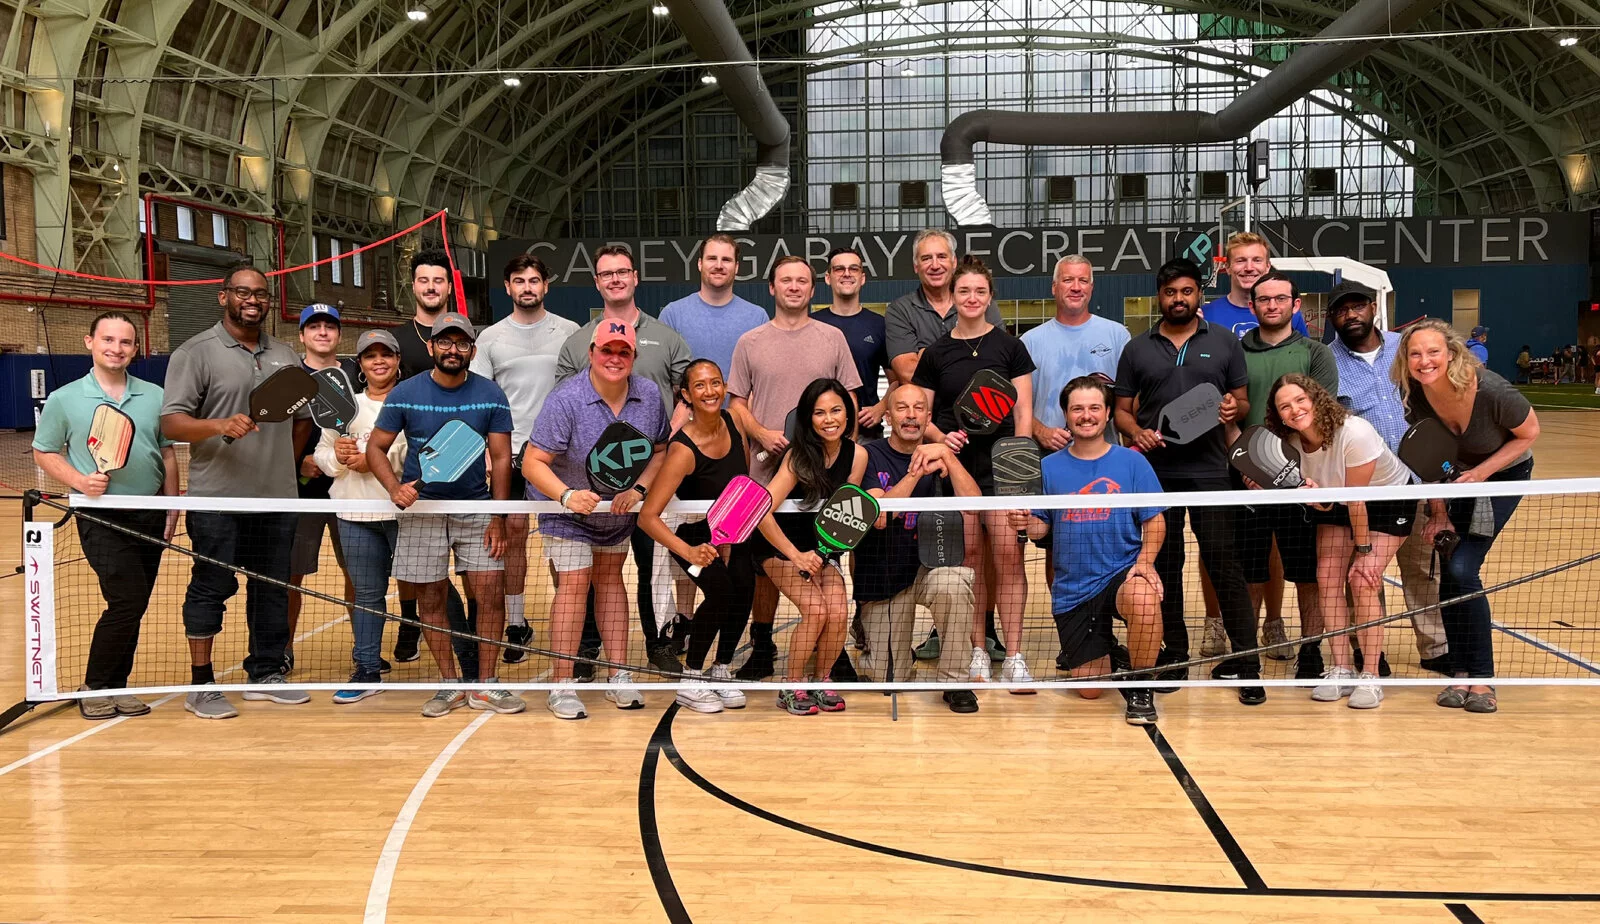 Our team in NY enjoyed some friendly Pickleball competition 2023/09/NY-Pickleball-Outing.jpg 